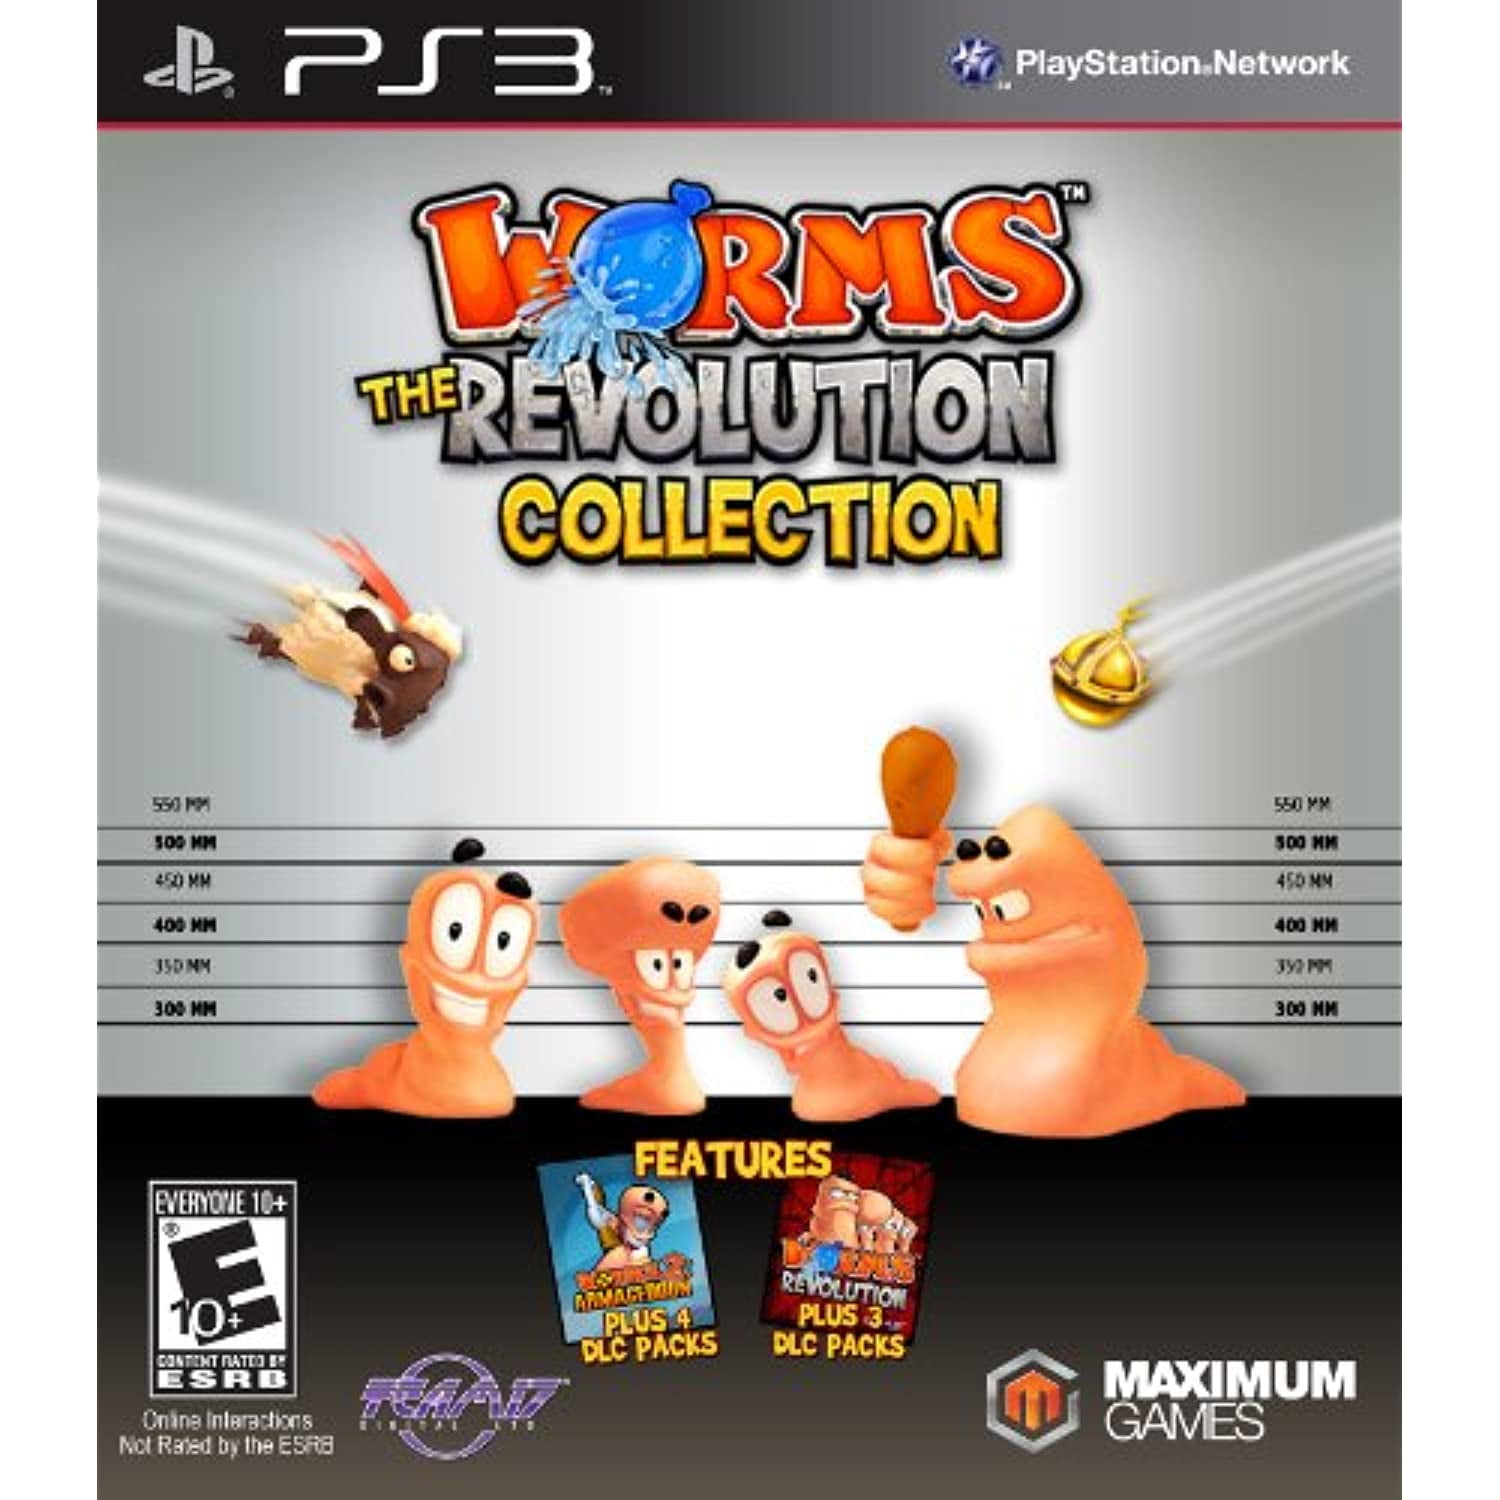 deltage petulance indsats Worms Revolution Collection - Playstation 3 Ps3 Edition - Walmart.com